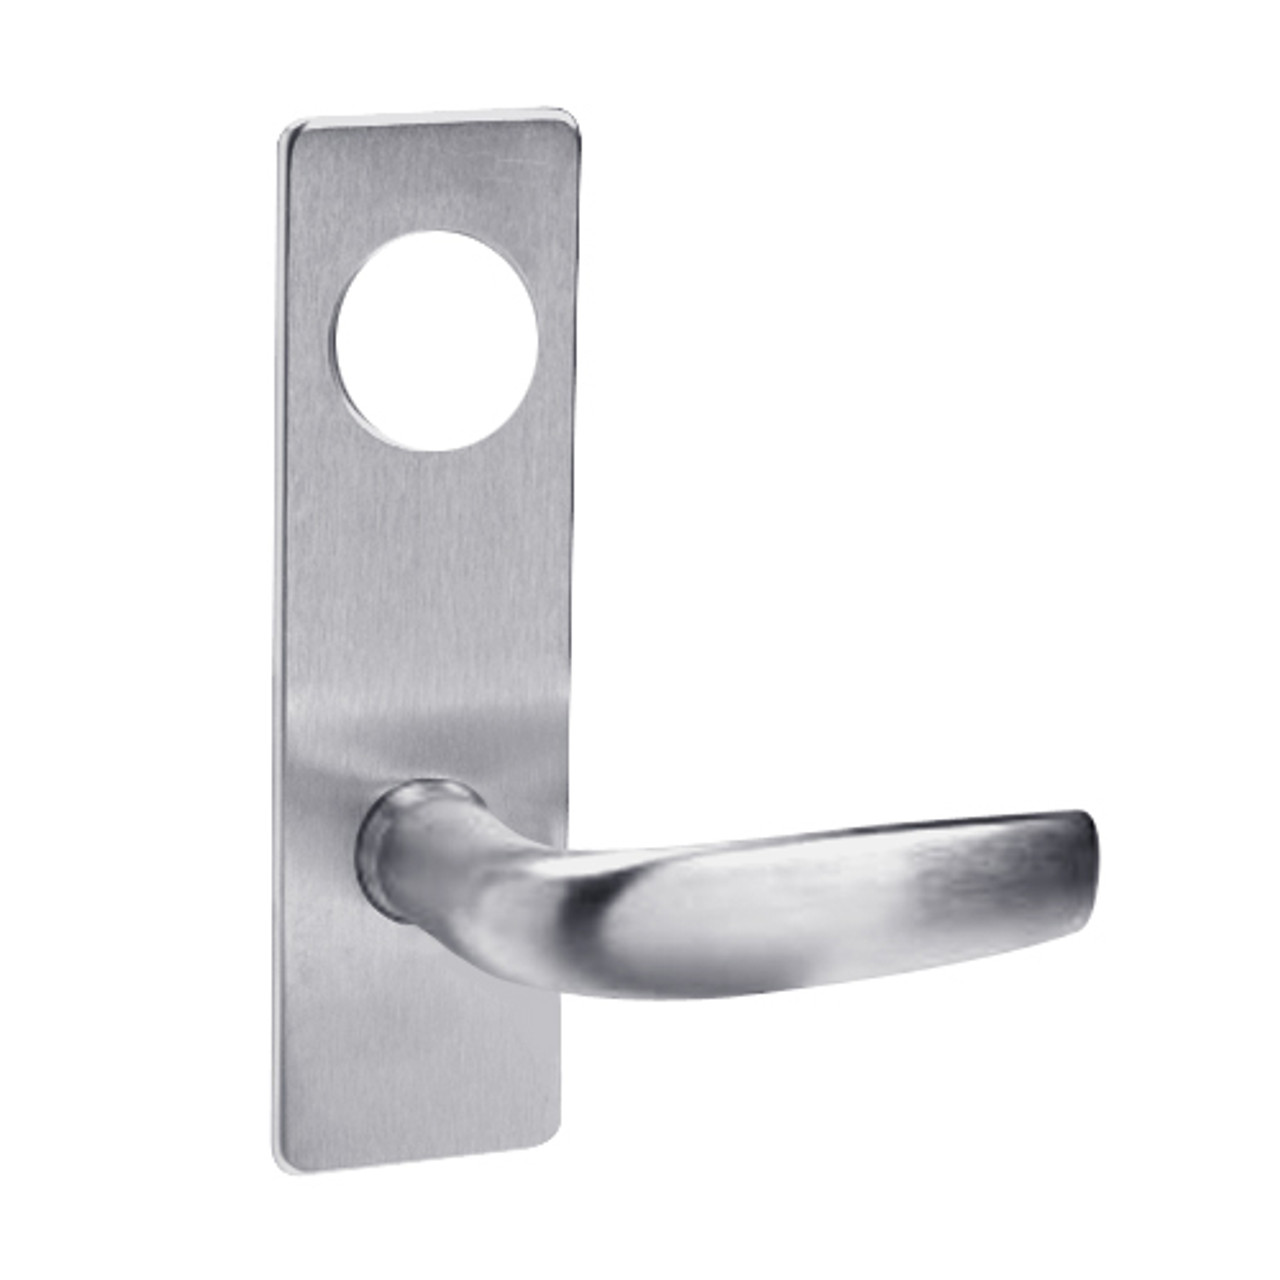 ML2069-CSR-626-CL7 Corbin Russwin ML2000 Series IC 7-Pin Less Core Mortise Institution Privacy Locksets with Citation Lever in Satin Chrome